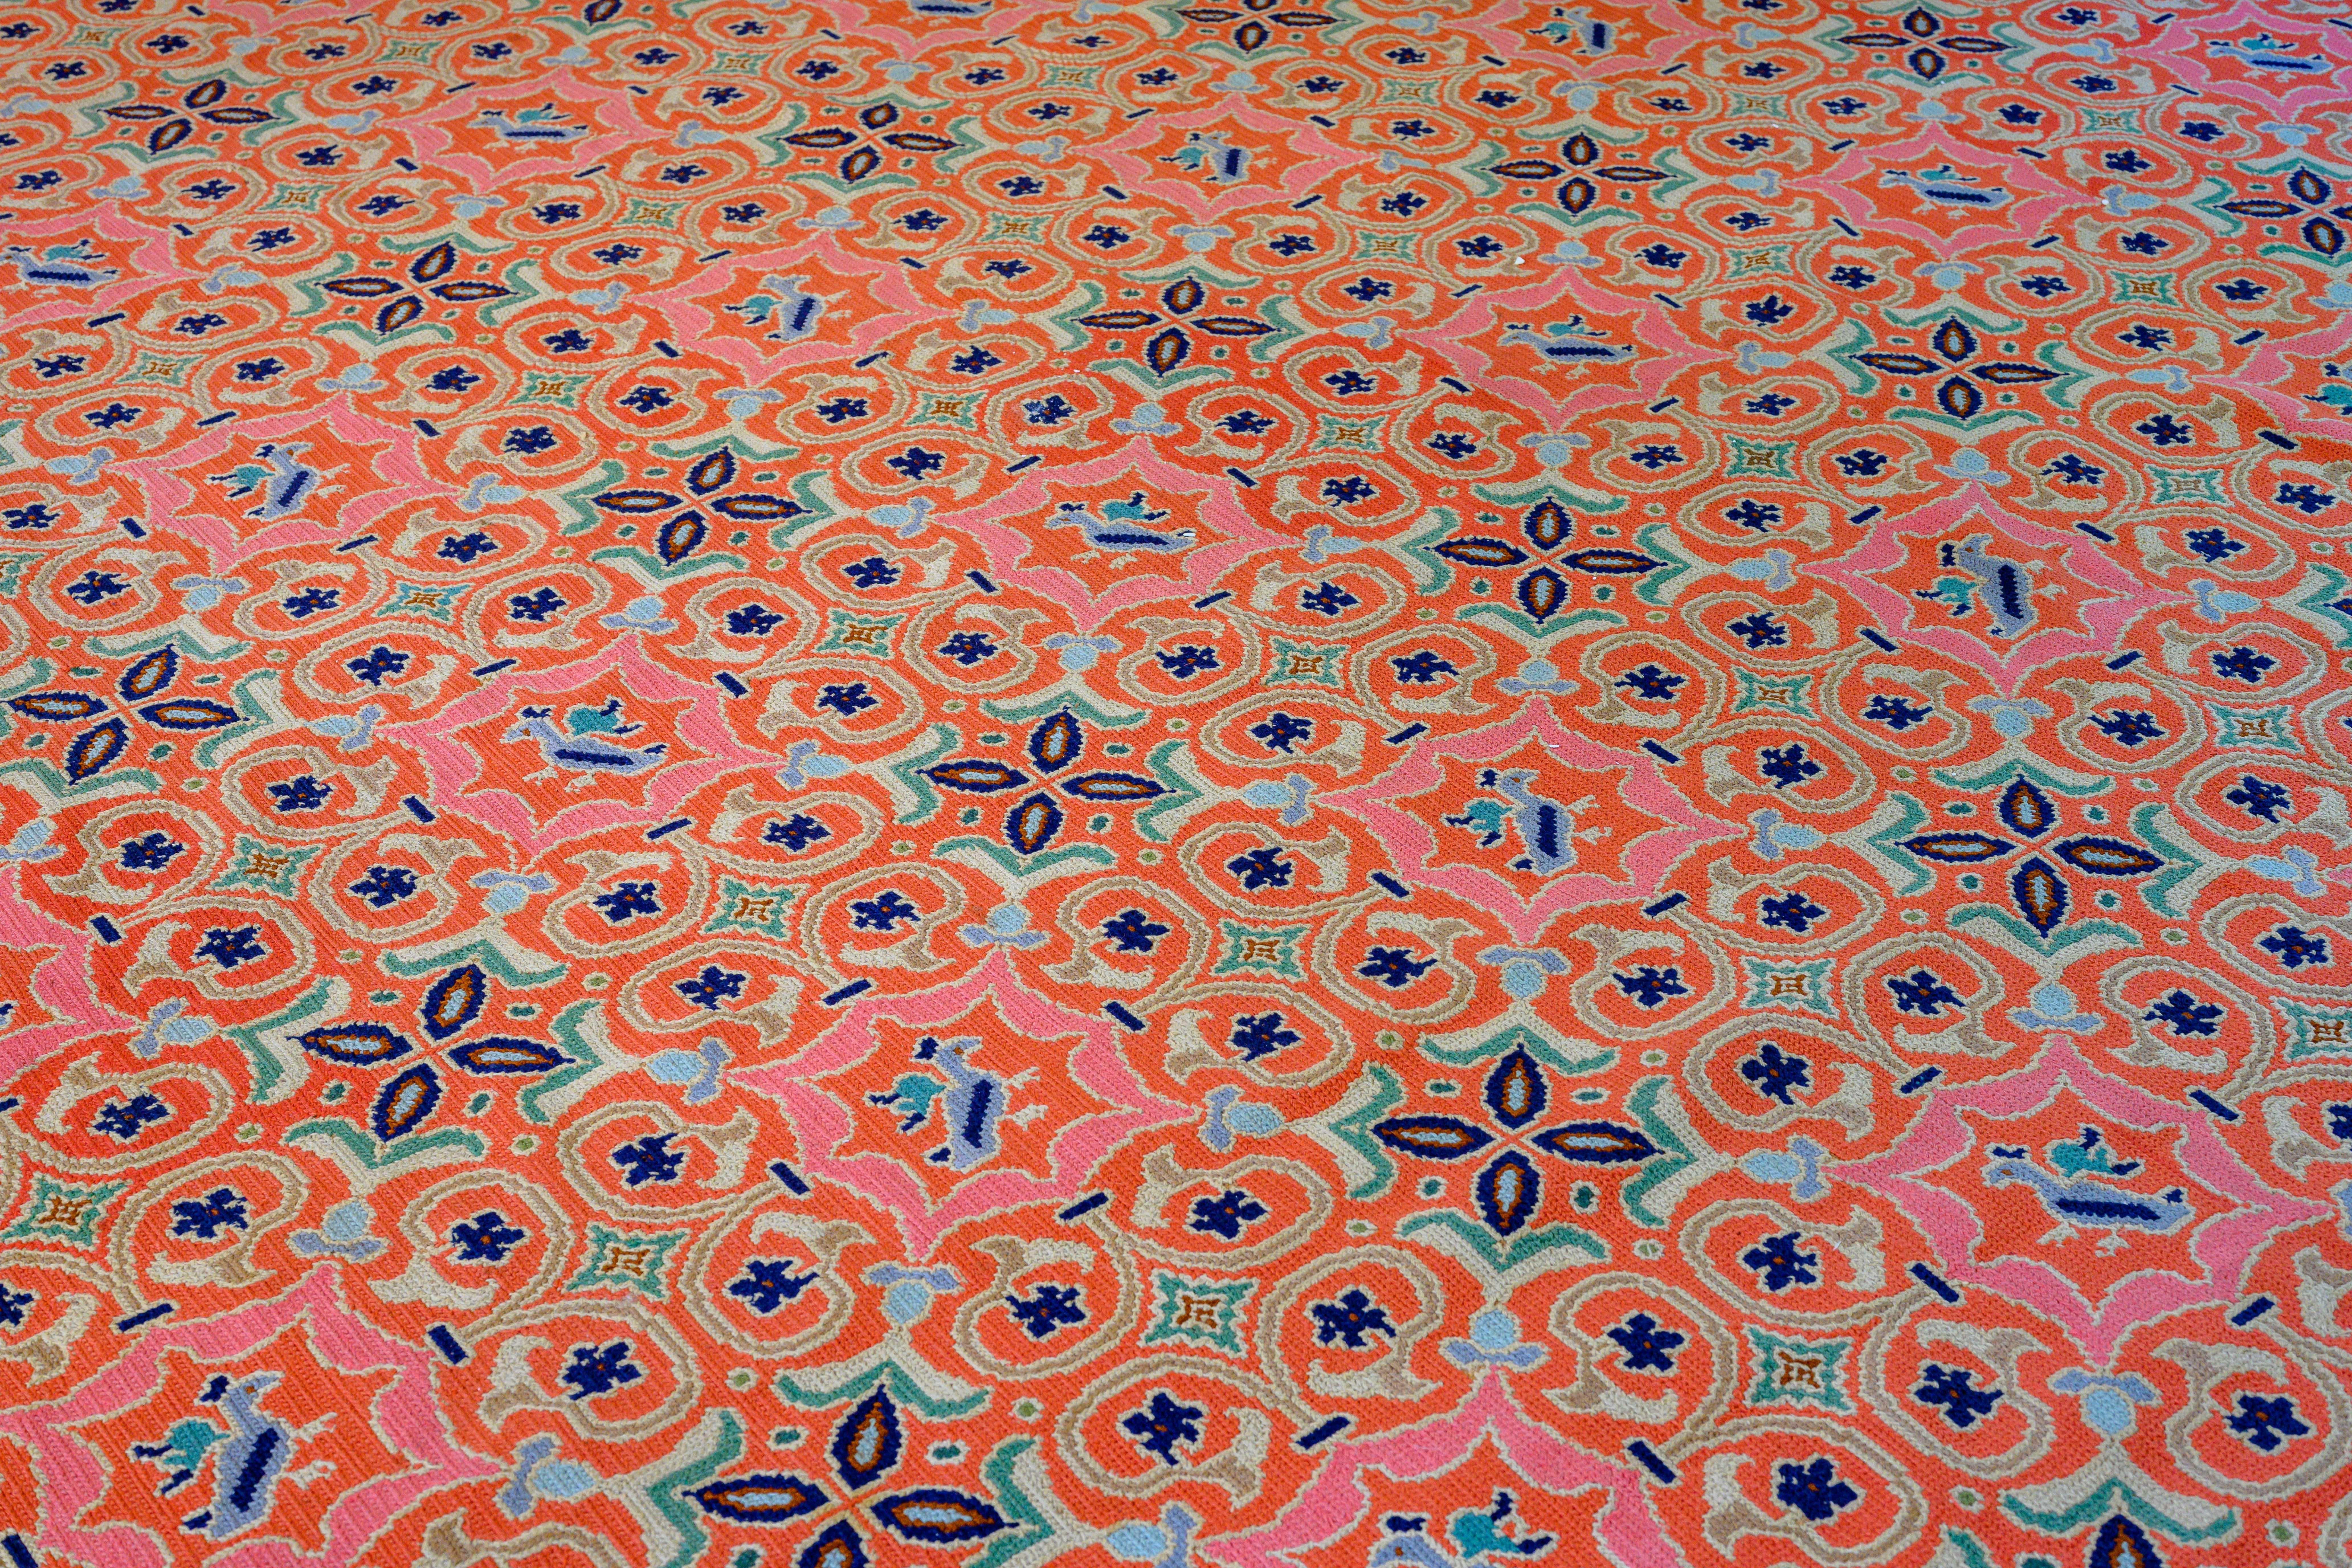 A Portugese vintage Arraiolos carpet, woven with needlework decoration inspired by the Spanish Moorish Azulejo tile designs, exceptionally large, fresh colors, circa 1980.

The city Arraiolos developed after political shifts that occurred in